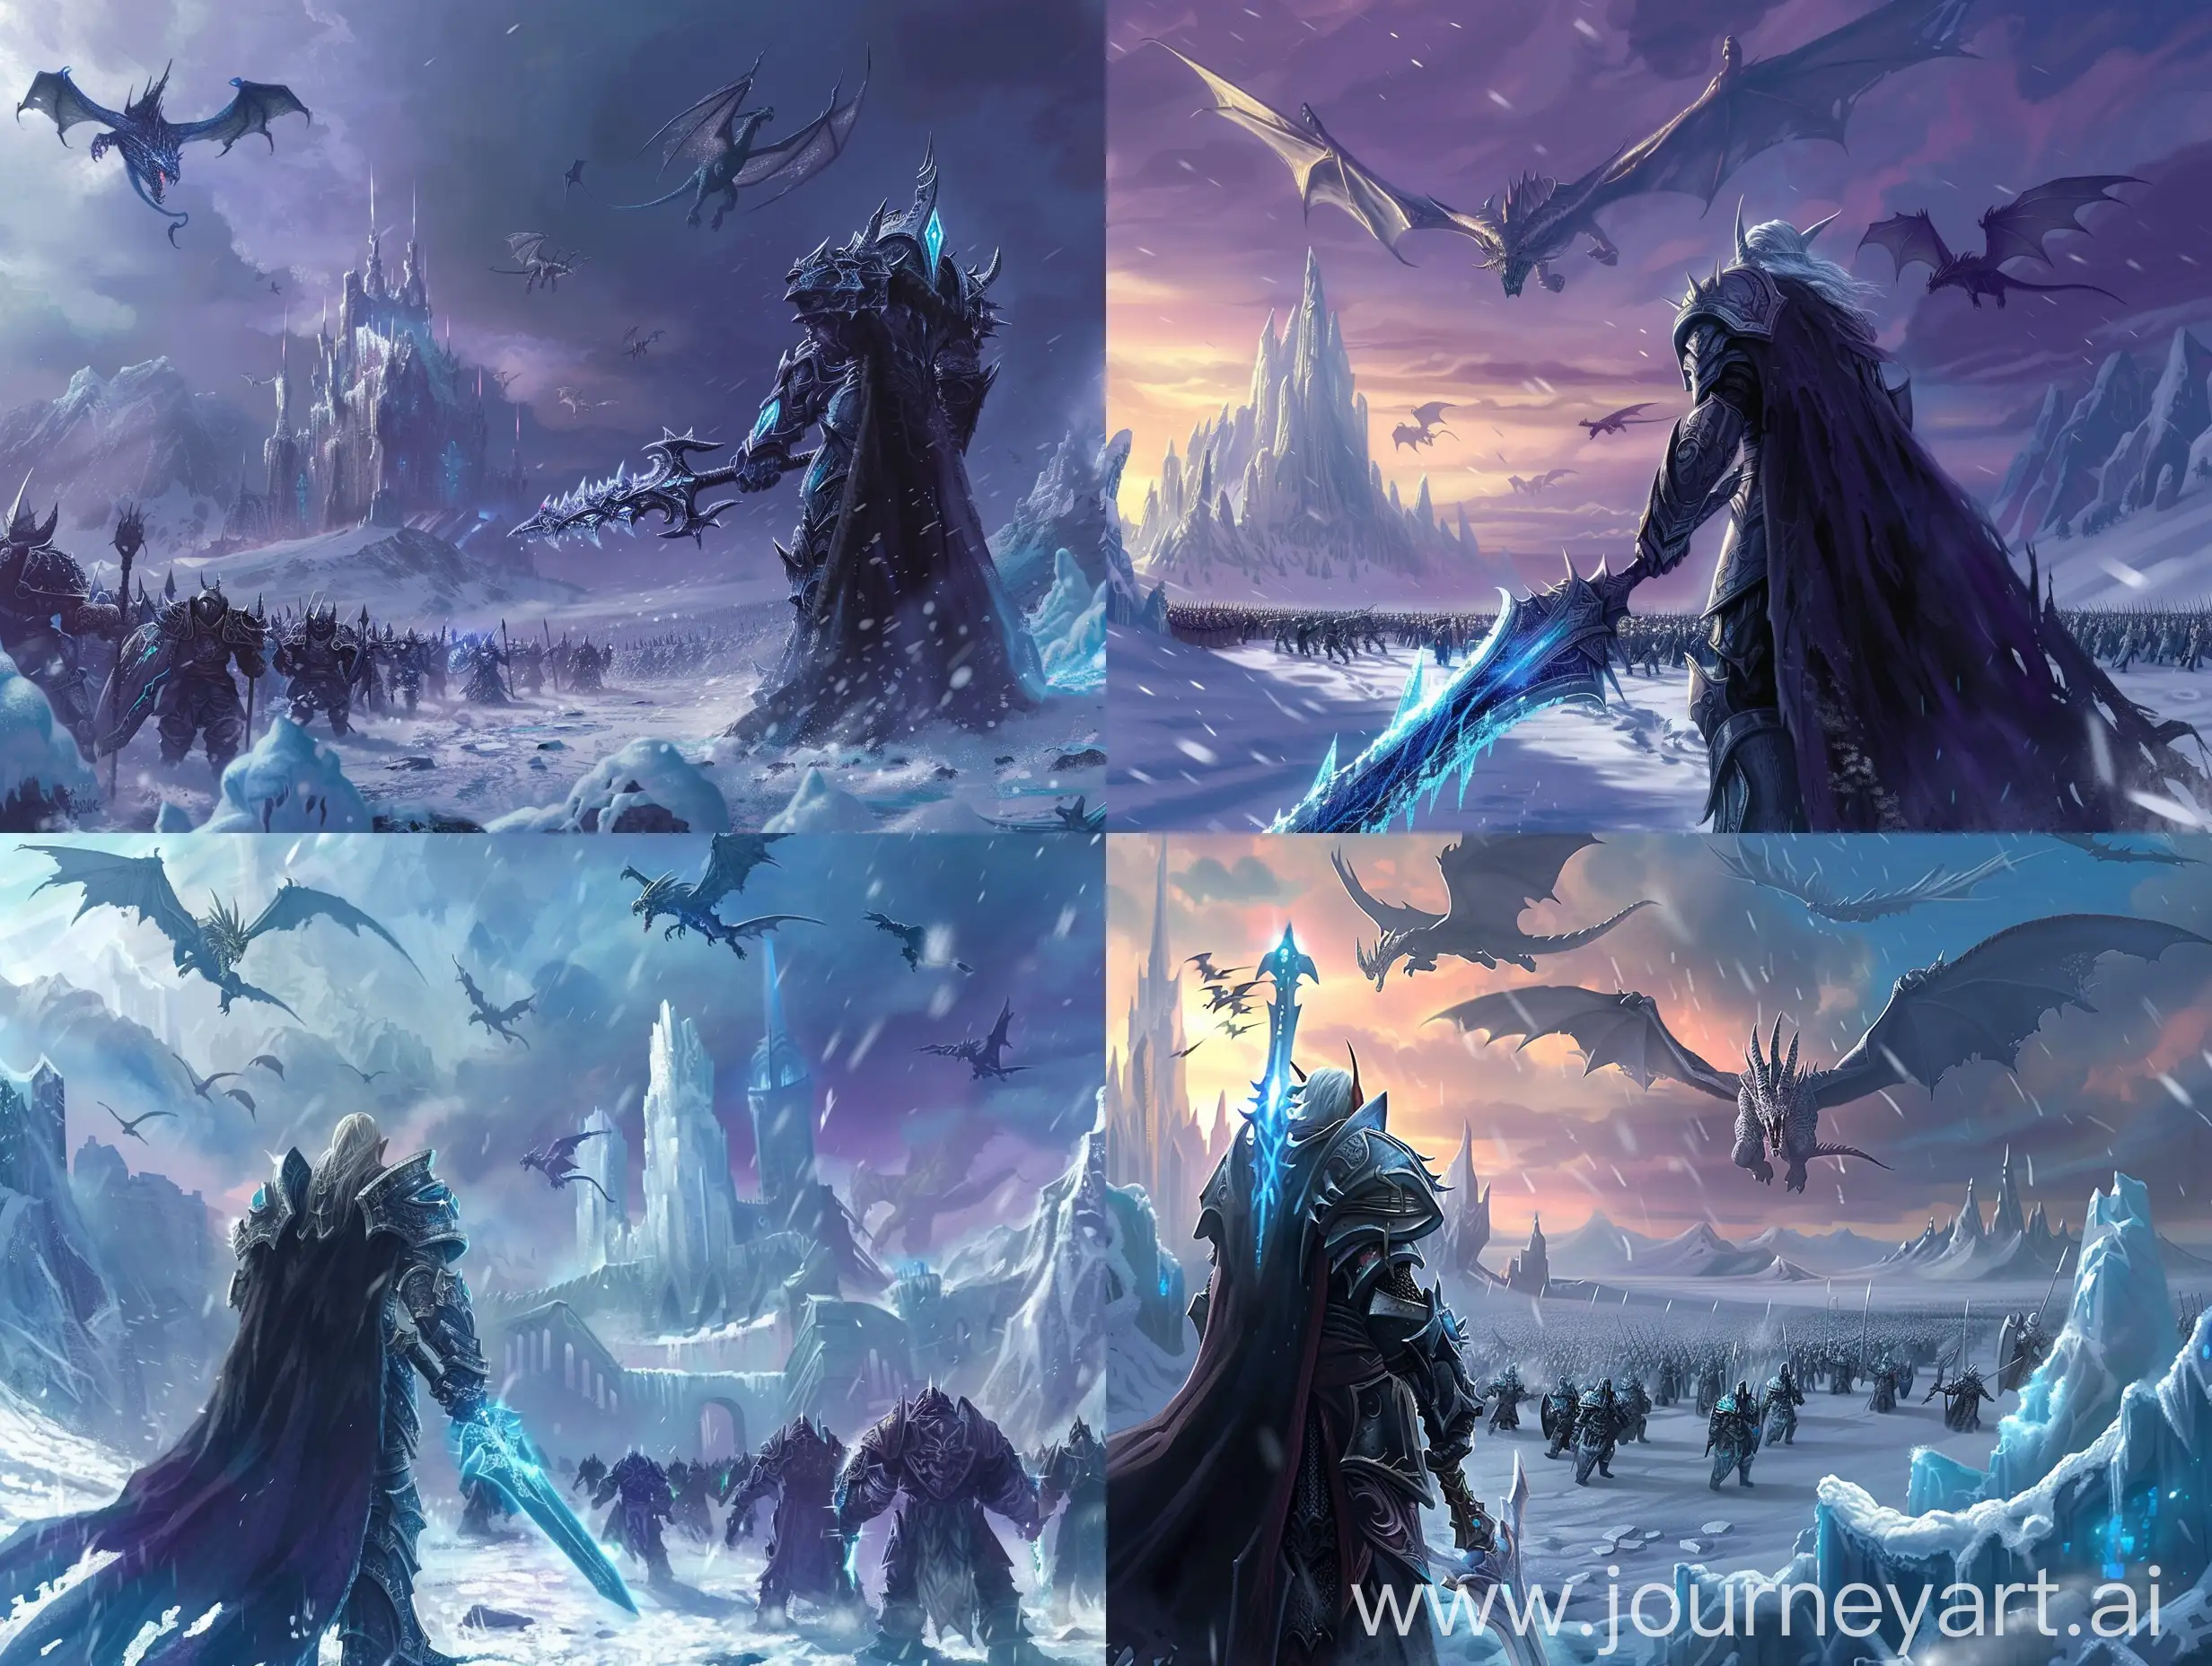 Arthas-Wielding-Frostmourne-Alone-in-Icecrown-Citadel-Amidst-Alliance-and-Horde-Armies-and-Soaring-Frost-Dragons